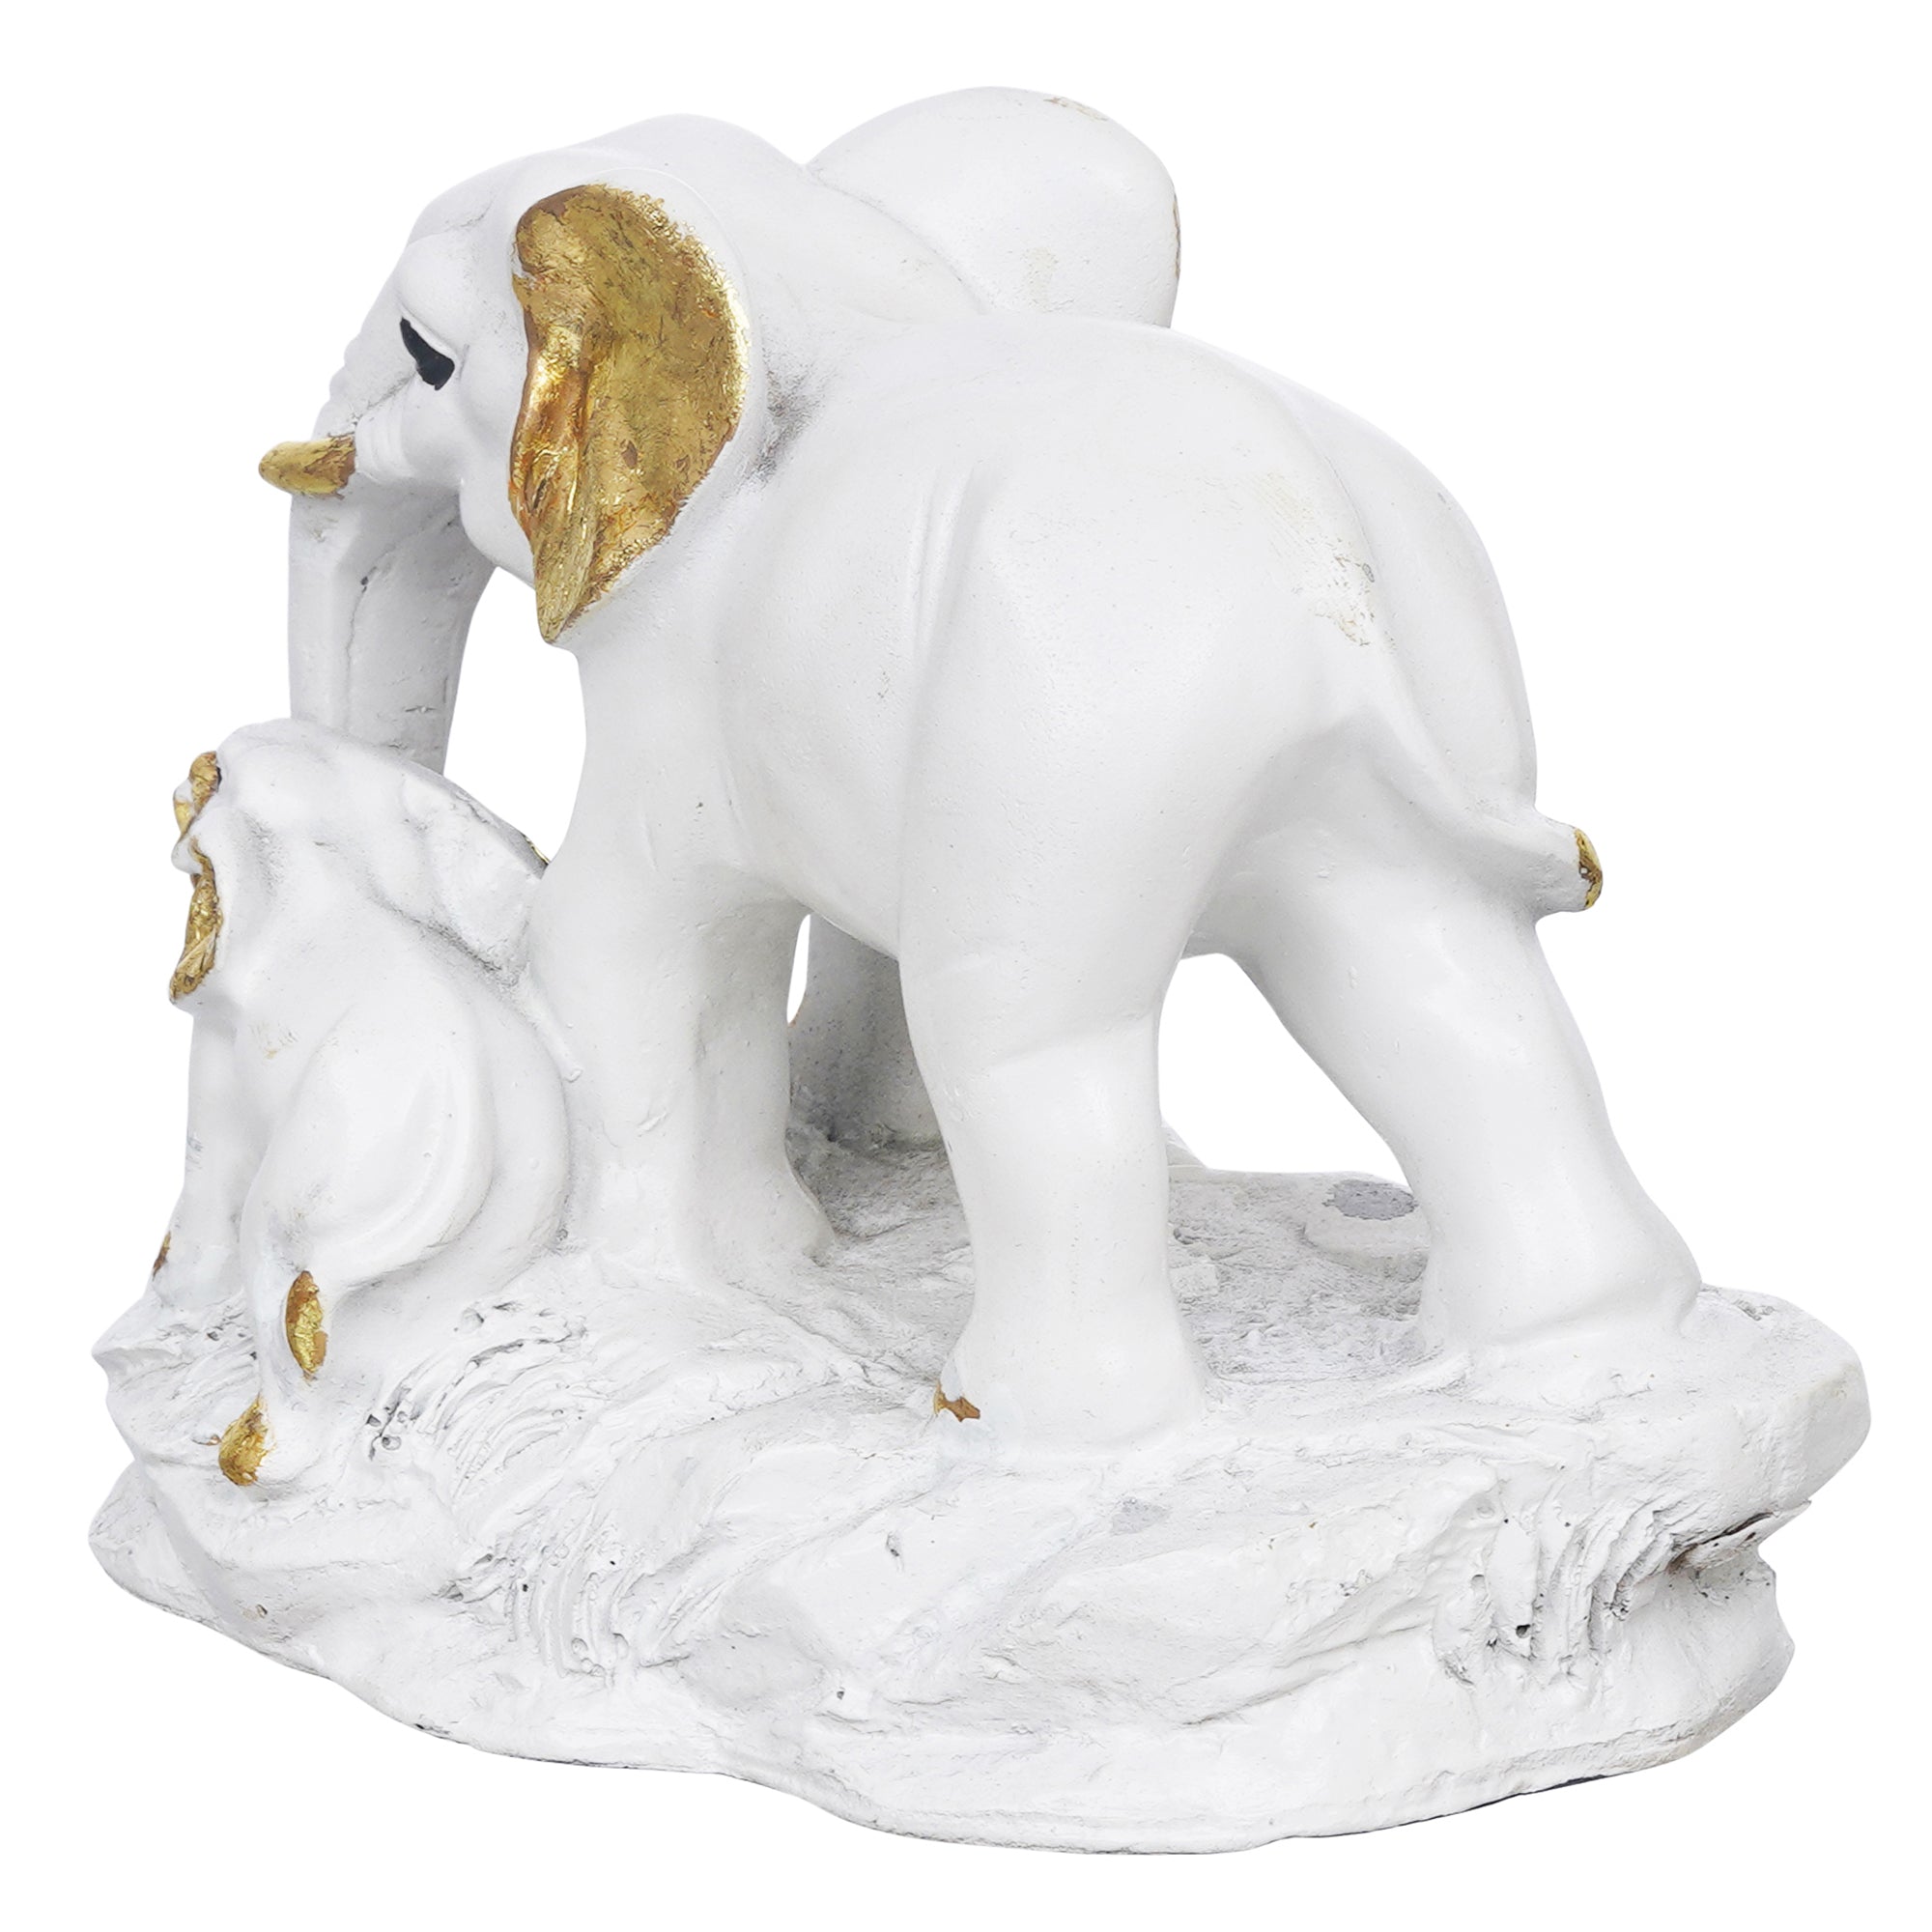 eCraftIndia White and Golden Cute Elephant with Baby Elephant Statues Animal Figurines Decorative Showpieces for Home Decor 8